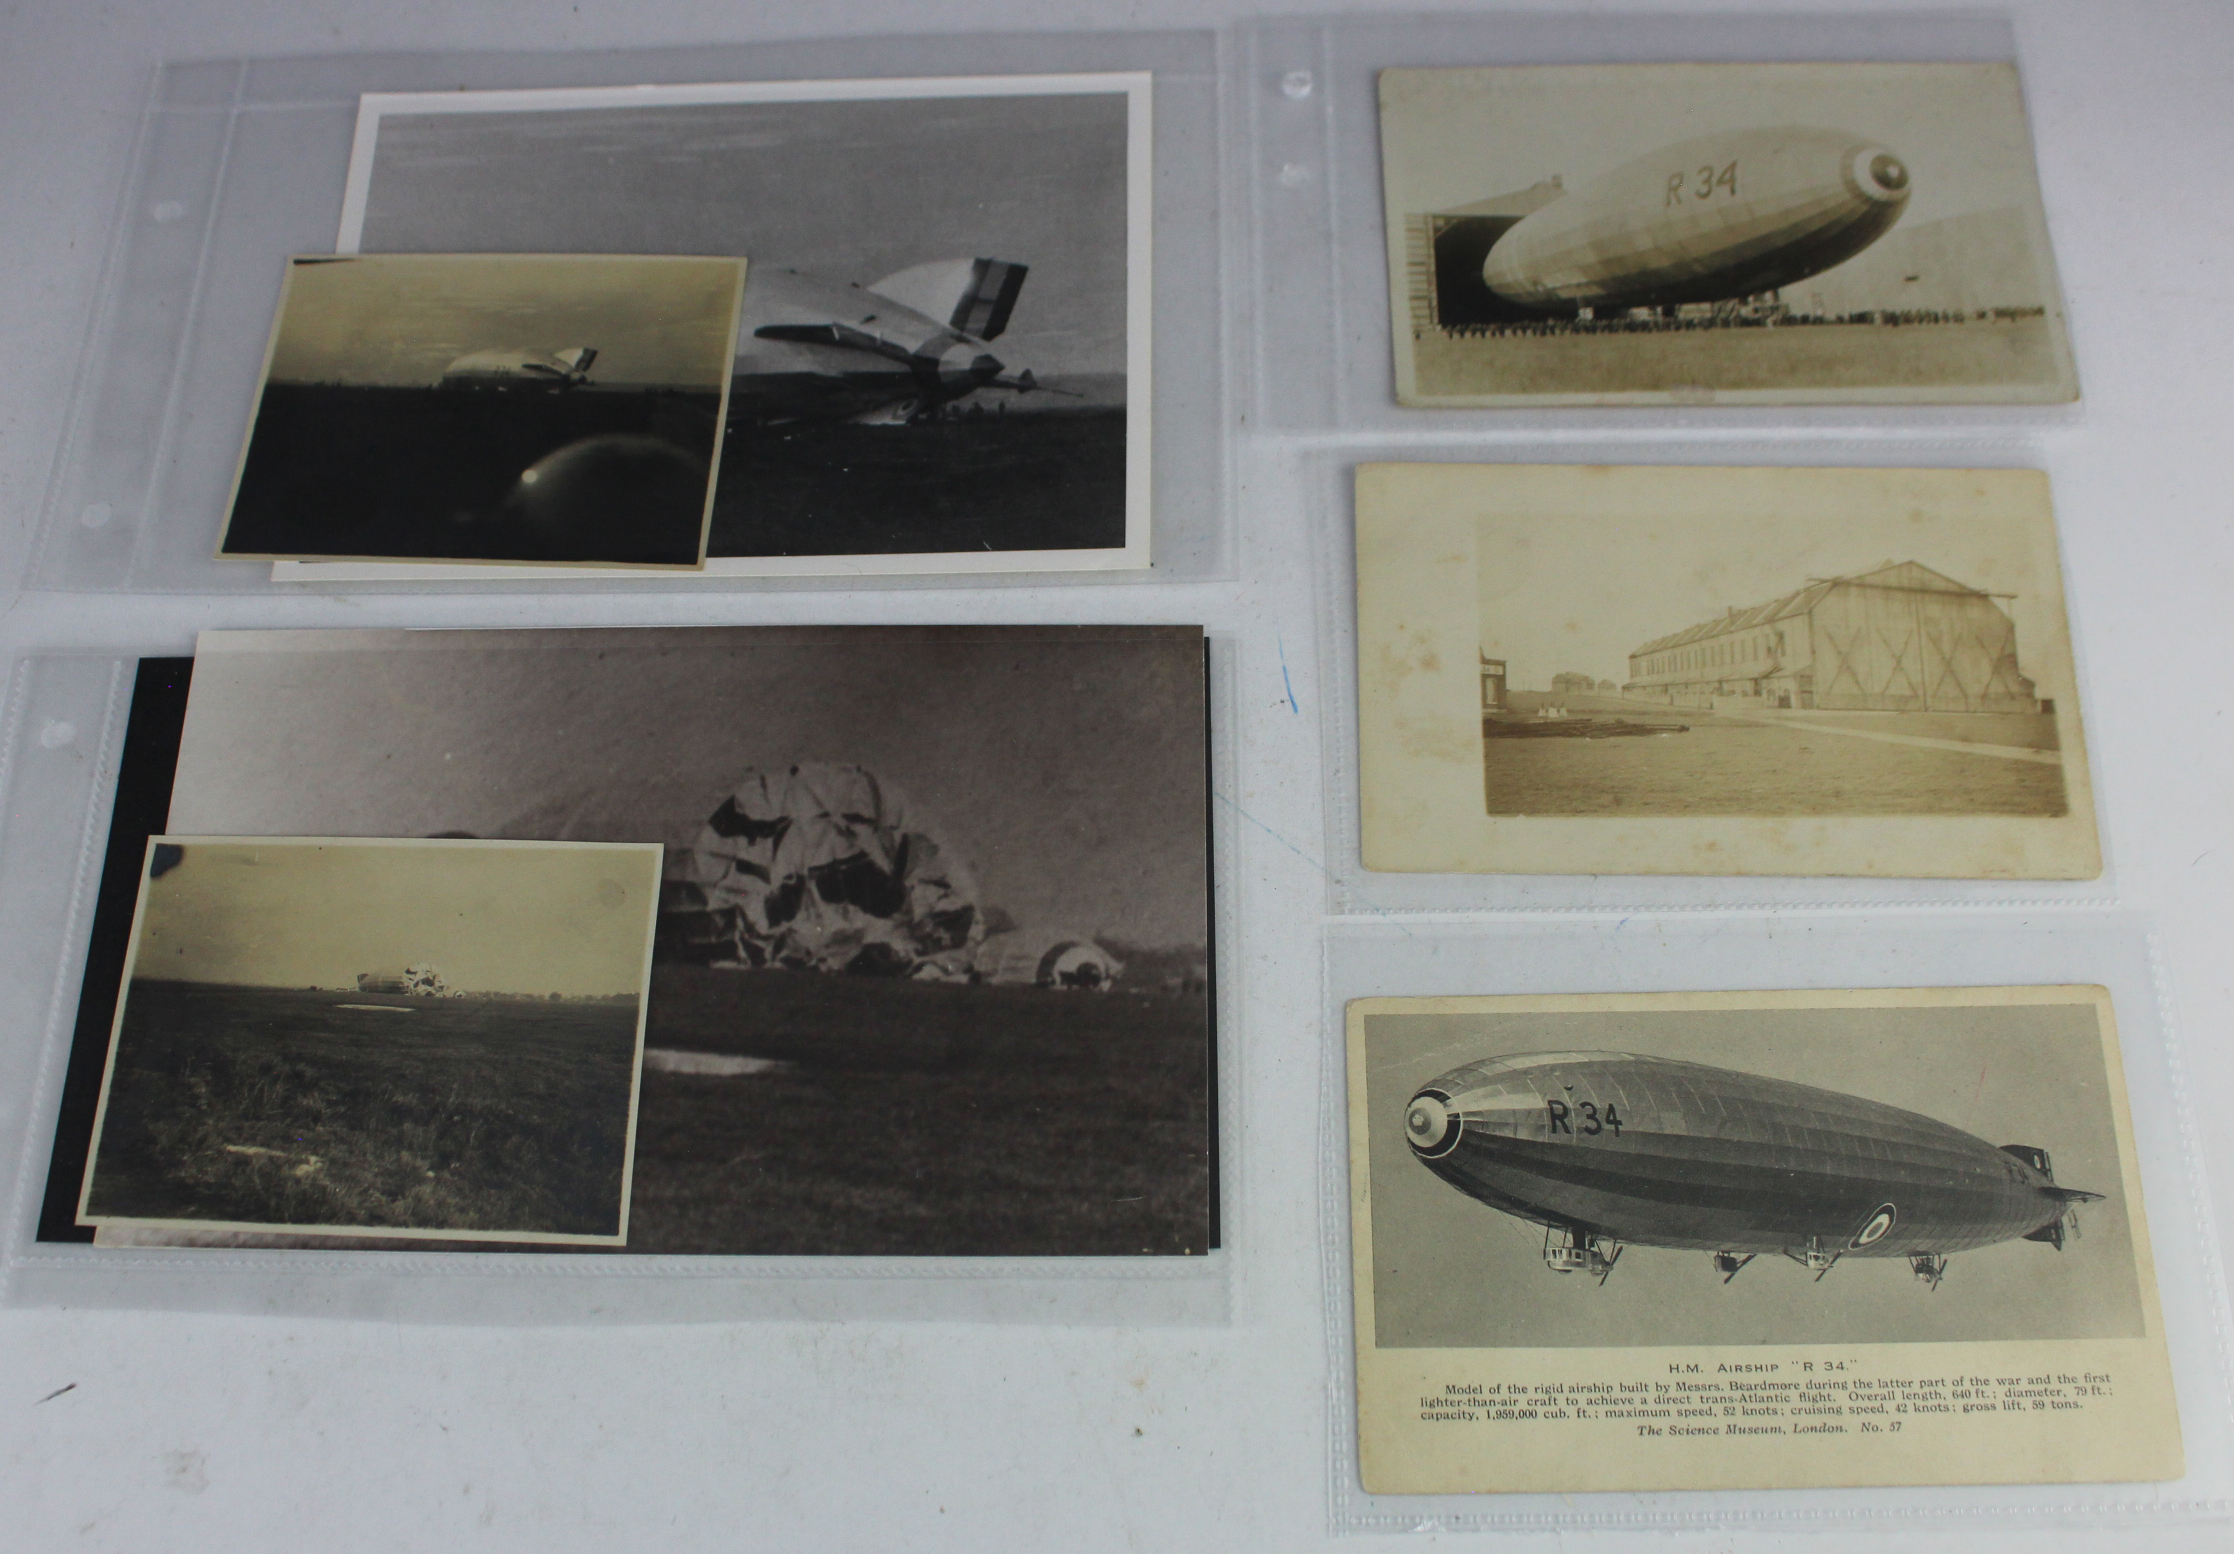 Airship collection relating to the R34, consisting of 2x postcards, and one of Cardington the